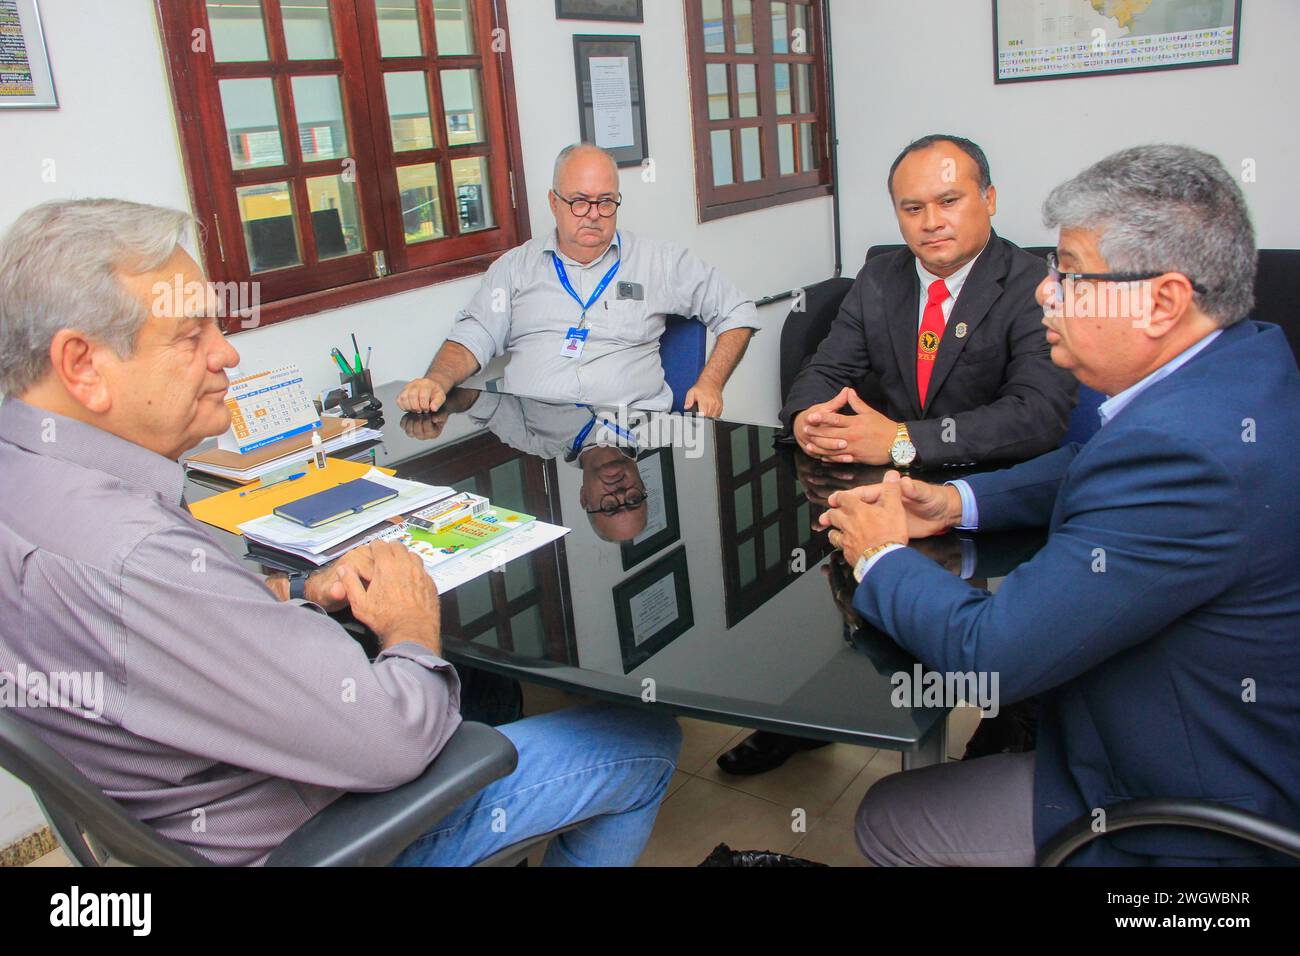 MACEI', AL - 06.02.2024: REUNIÃO GOV AL COM REP CIDADE TACNA PERU - Meeting in Maceió this Tuesday (6) with Mr Luiz Henrique, representative of governor Luiz Torres Robledo, from Tacna, Peru, with the vice-governor, Ronaldo Lessa. On the agenda are issues in the areas of sports, health and tourism, sealing an entrepreneurial exchange between the two States. (Photo: GUIDO JR./Fotoarena) Stock Photo